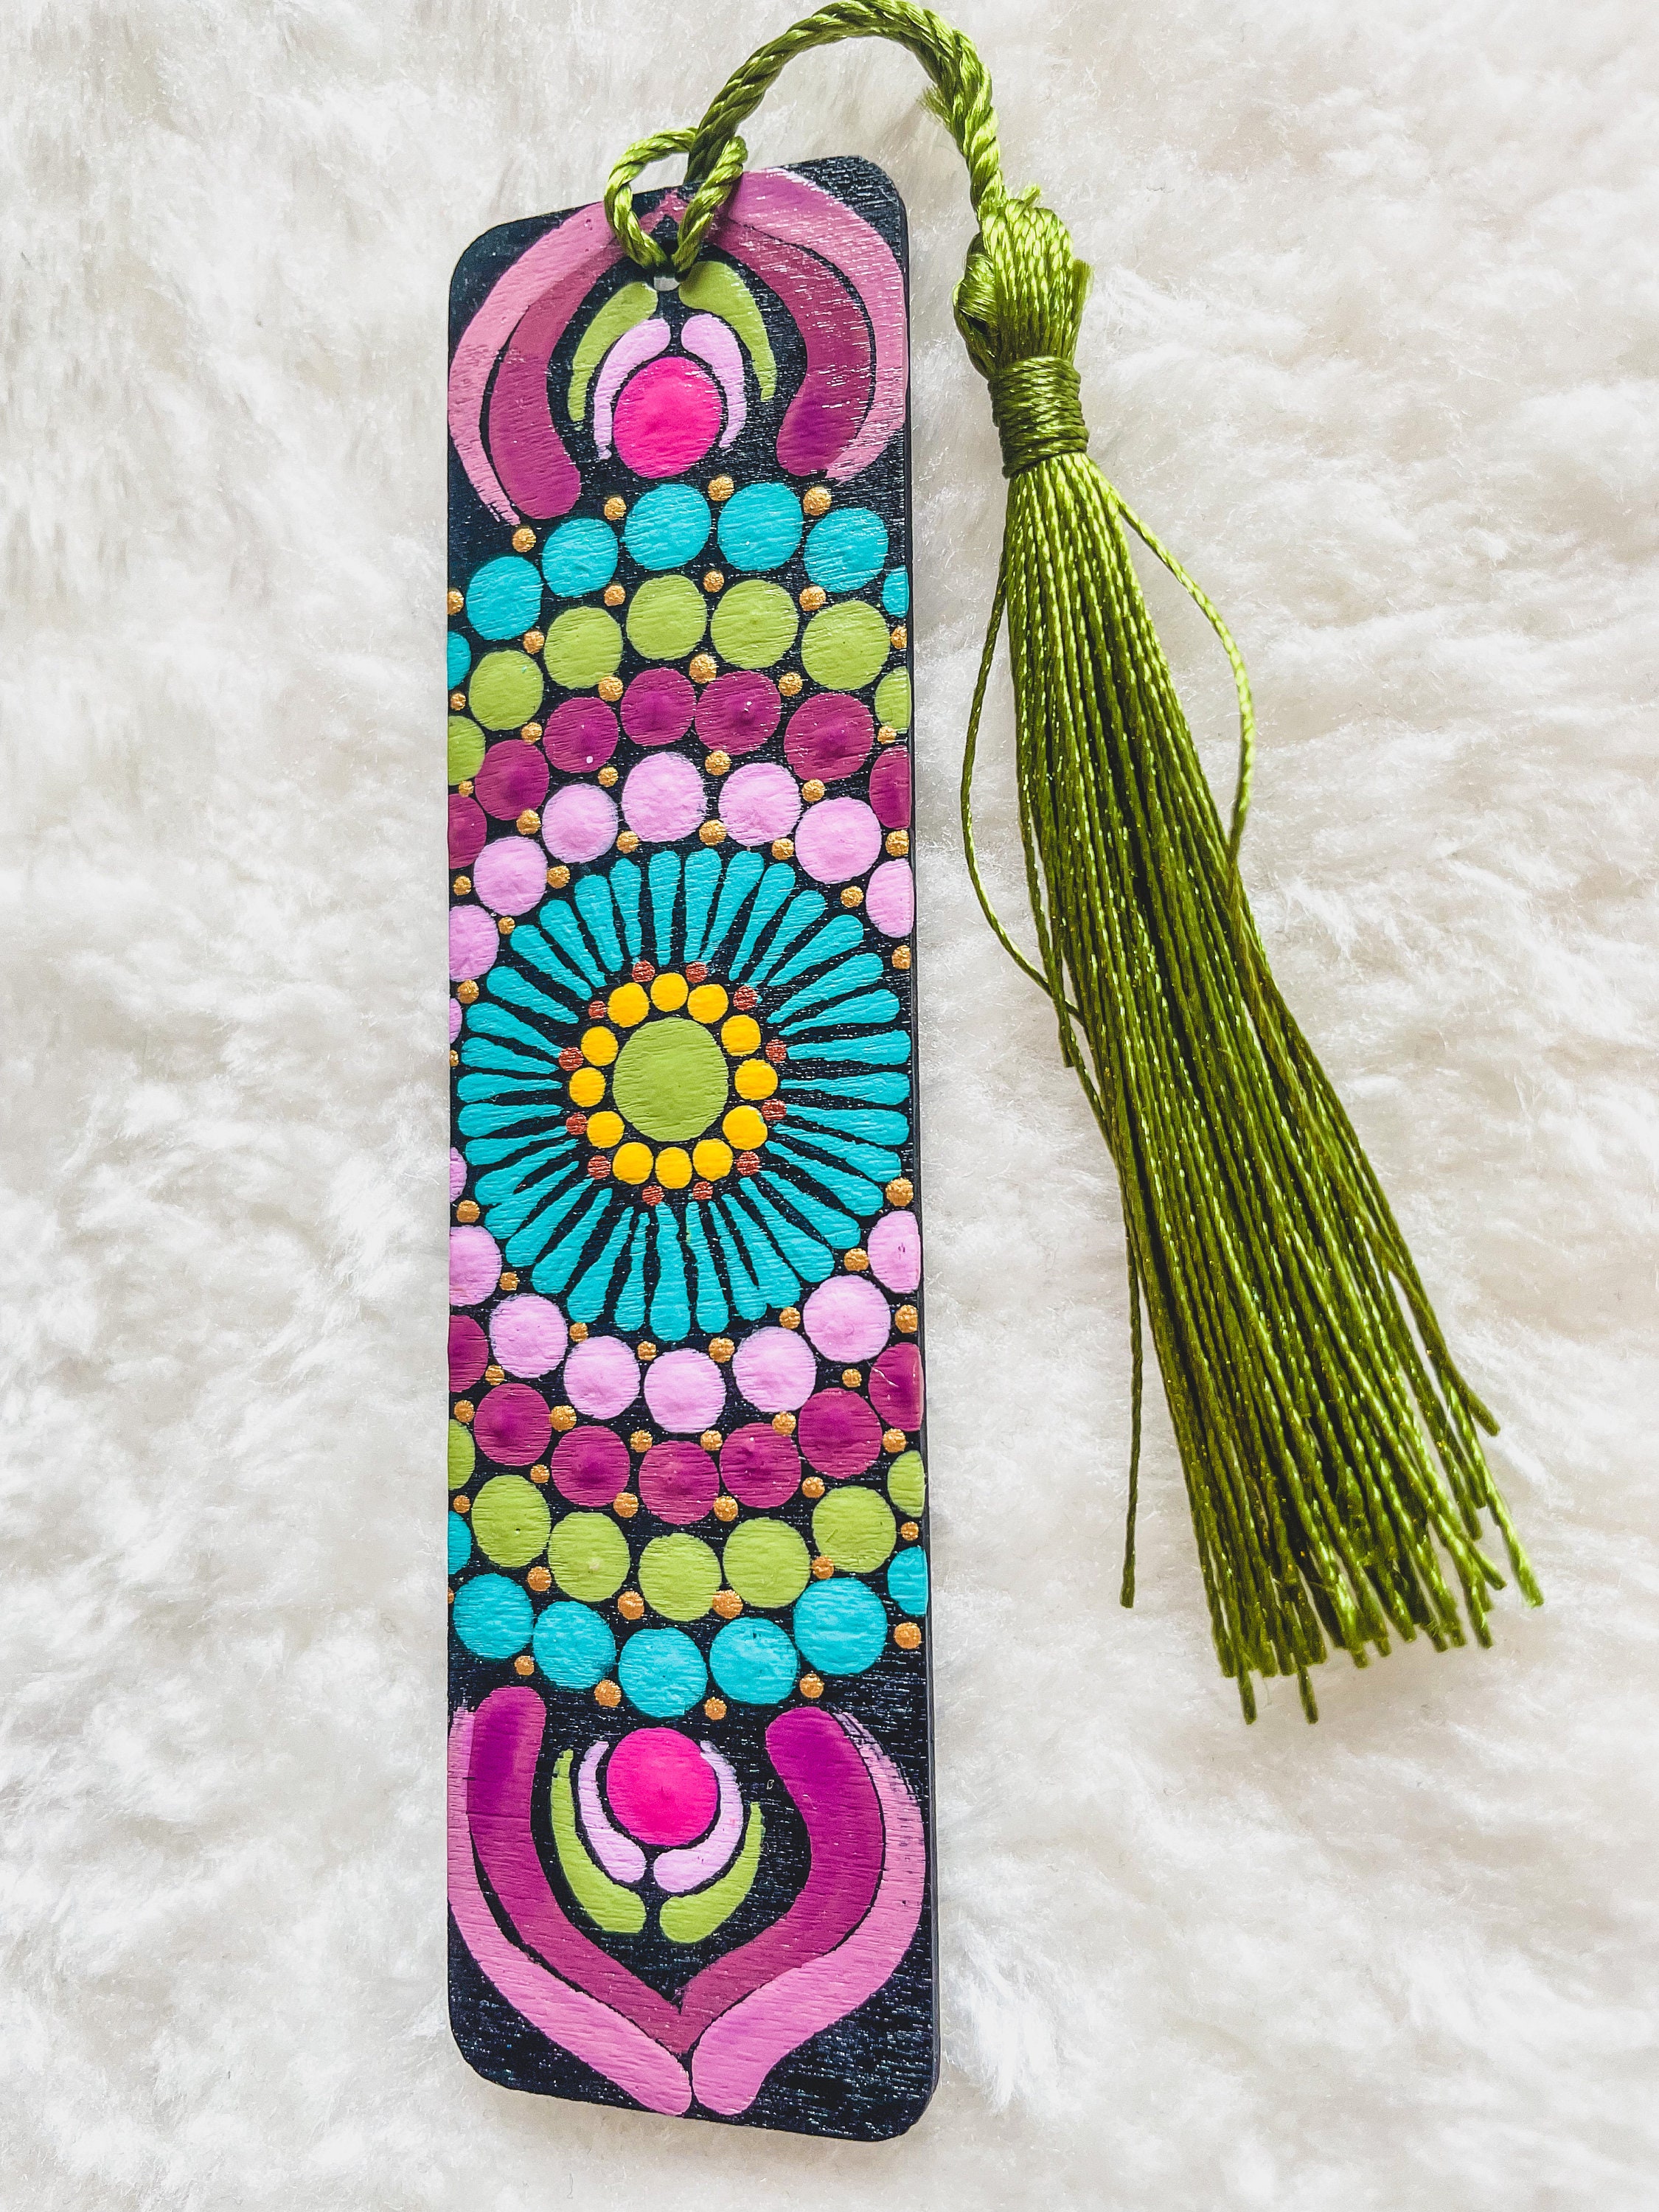 Hand Painted Bookmarks With Tassel Dot Mandala on Wood pic